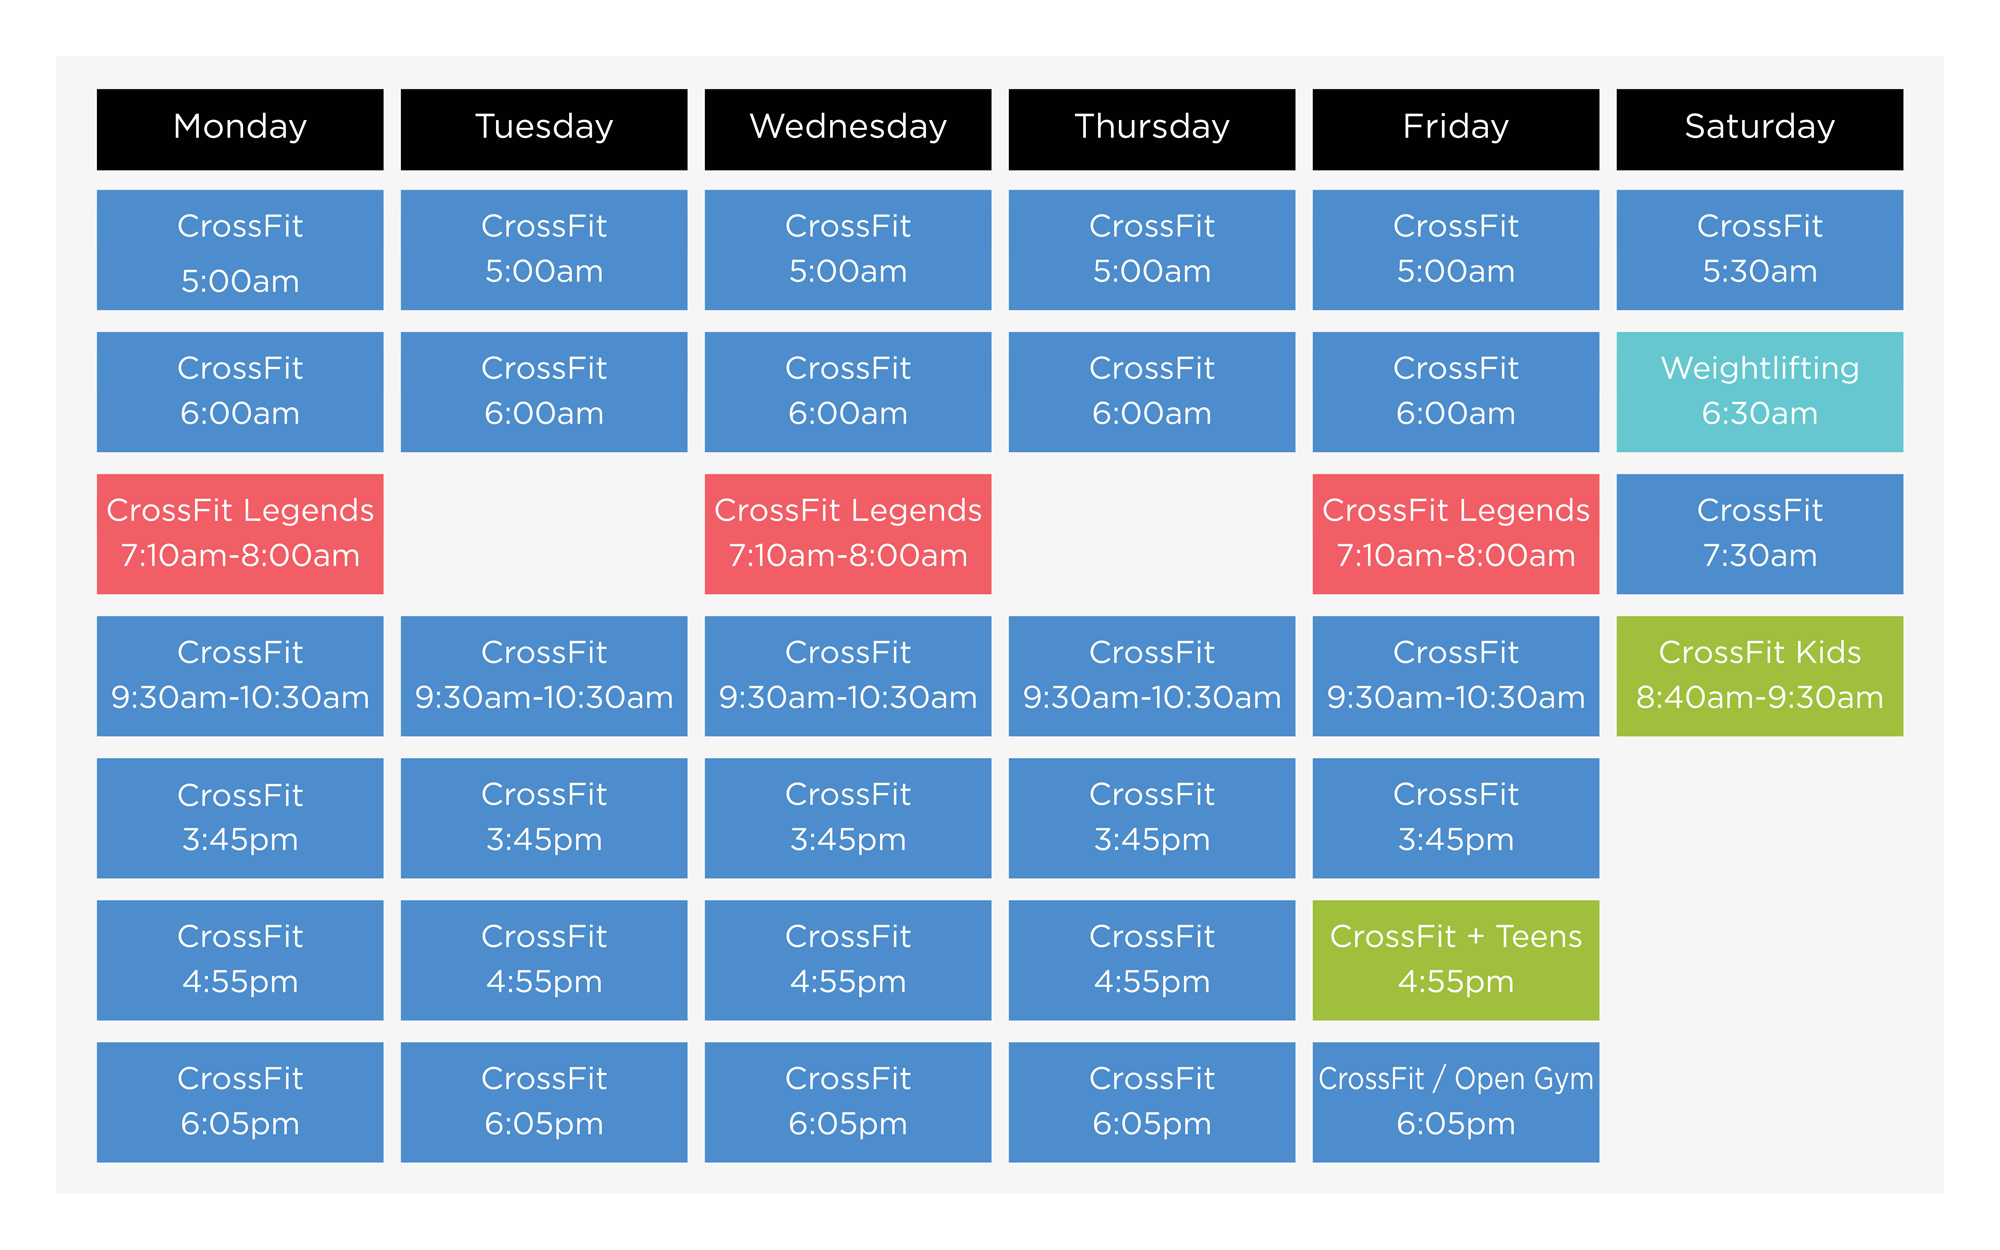 CrossFit King Timetable